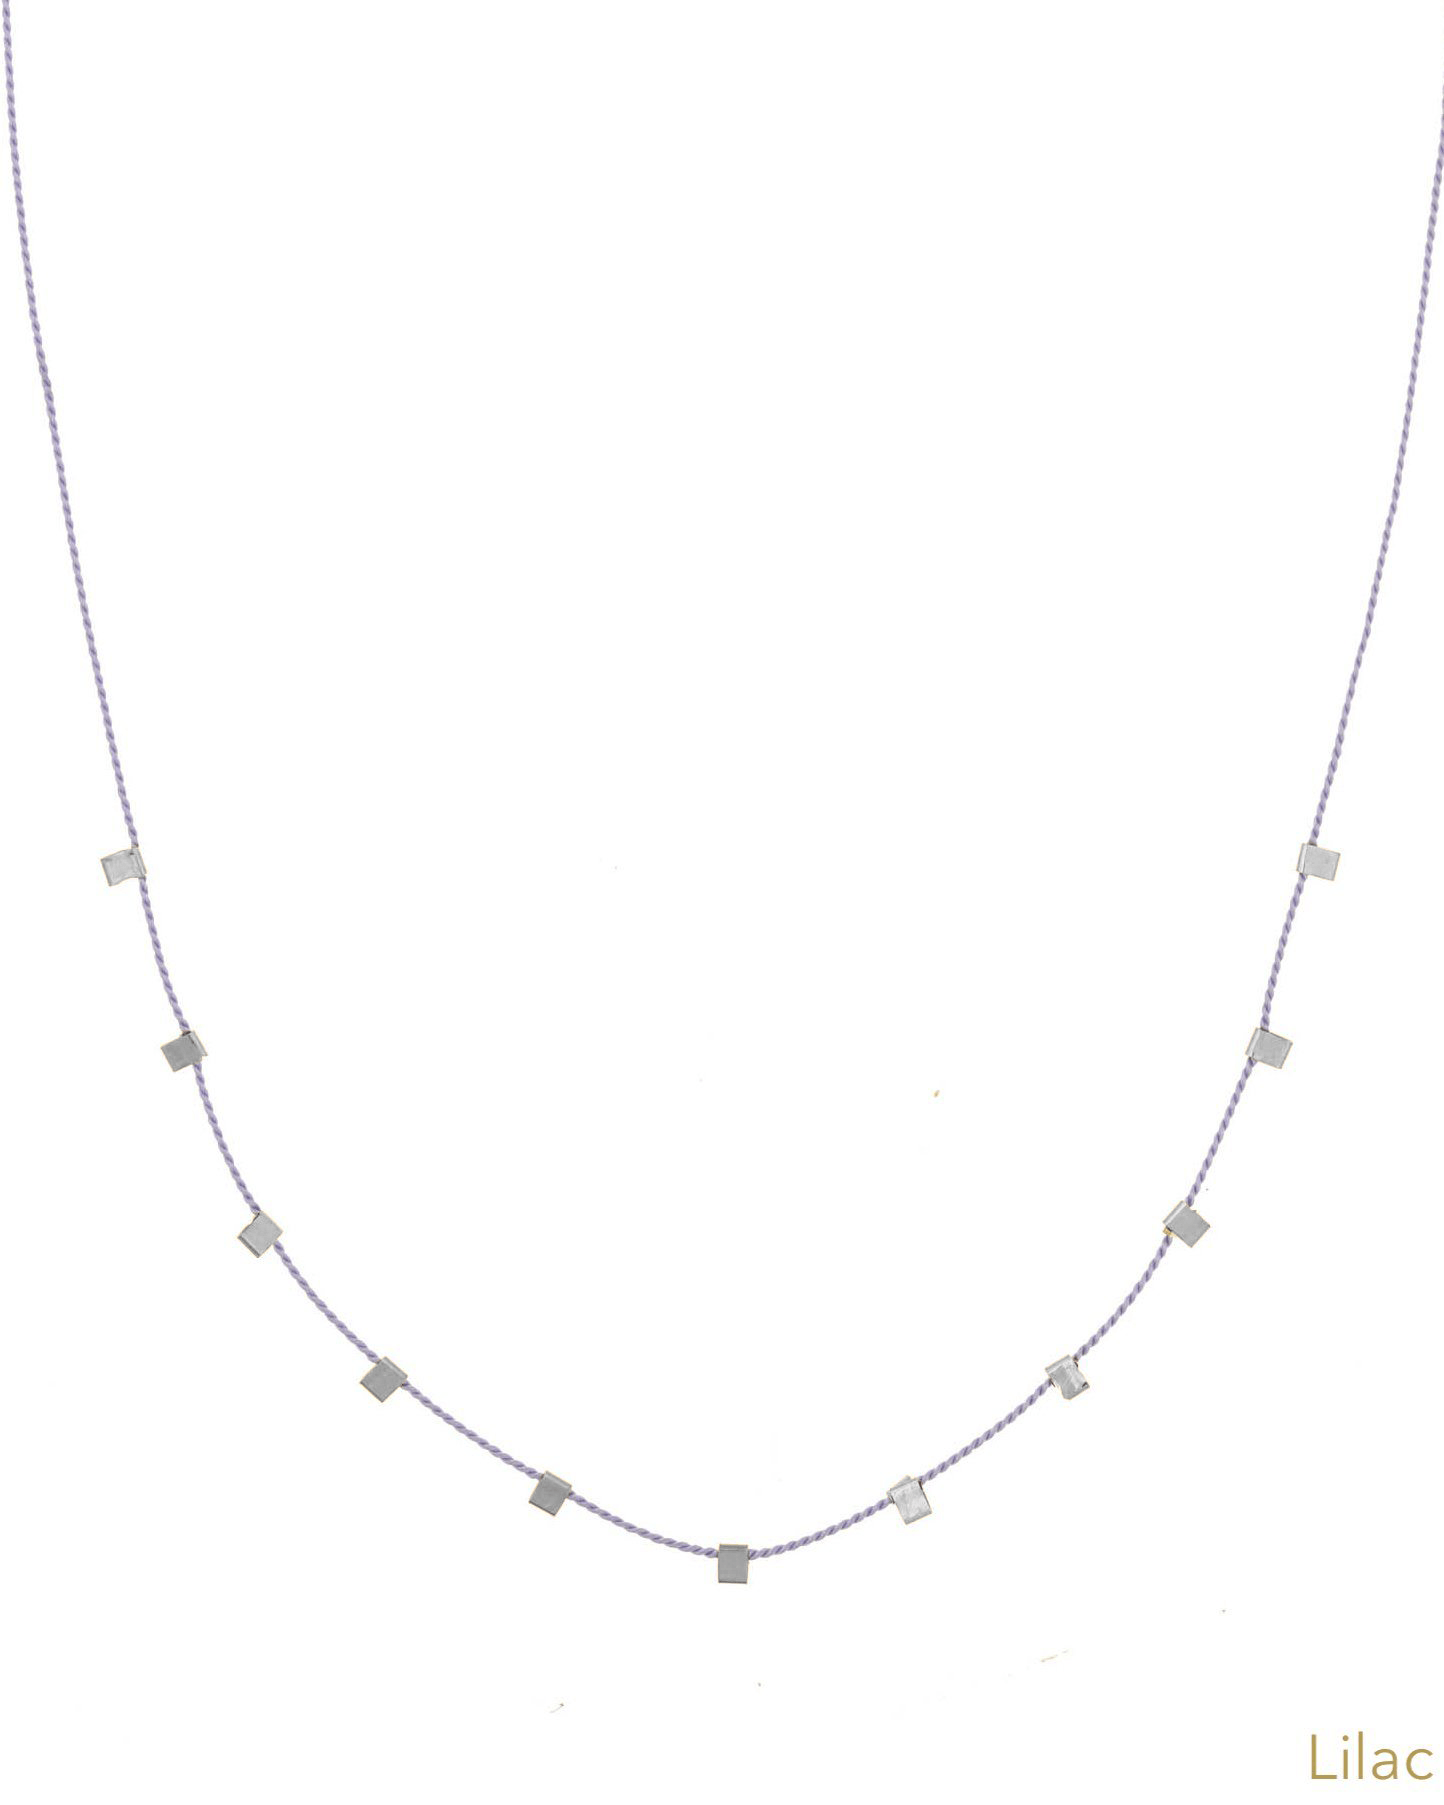 Hilo Necklace by KOZAKH. A 16 inch long natural silk thread necklace, embellished with Sterling Silver square cut metals.